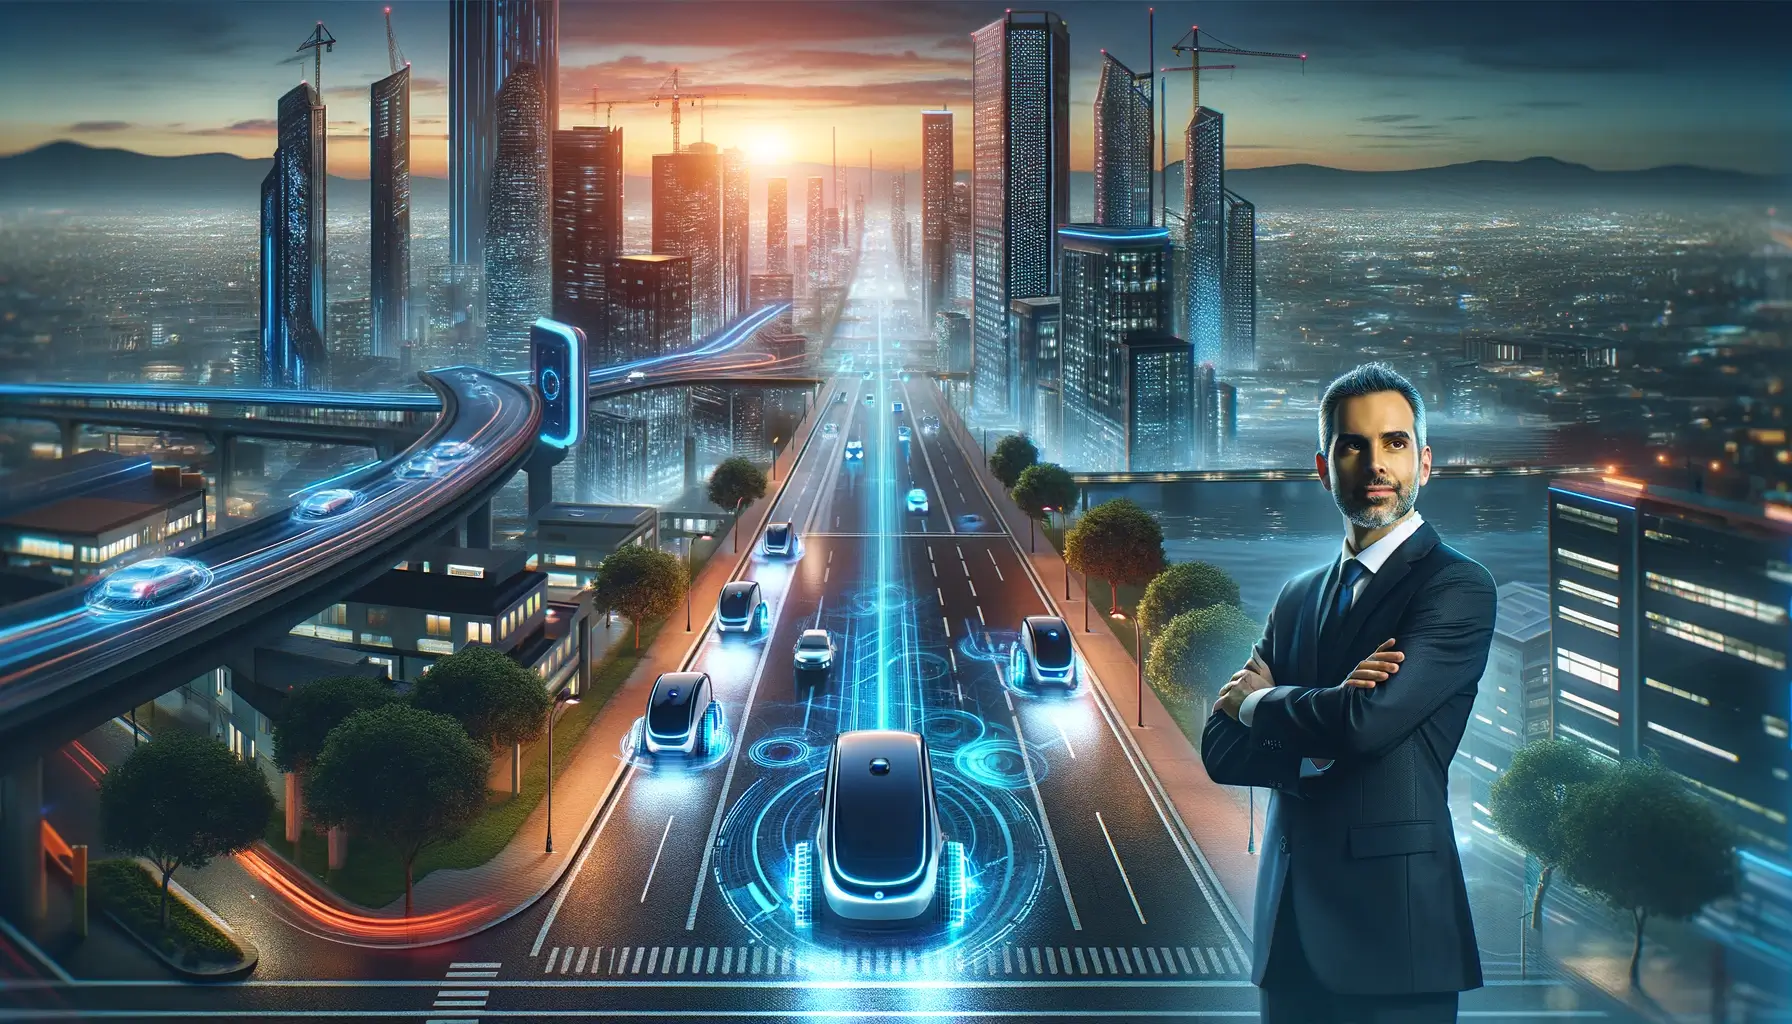 Futuristic cityscape at dusk with autonomous vehicles and a professional overseeing safety, symbolizing Steve Kenner's leadership in driving safety innovation for Cruise.